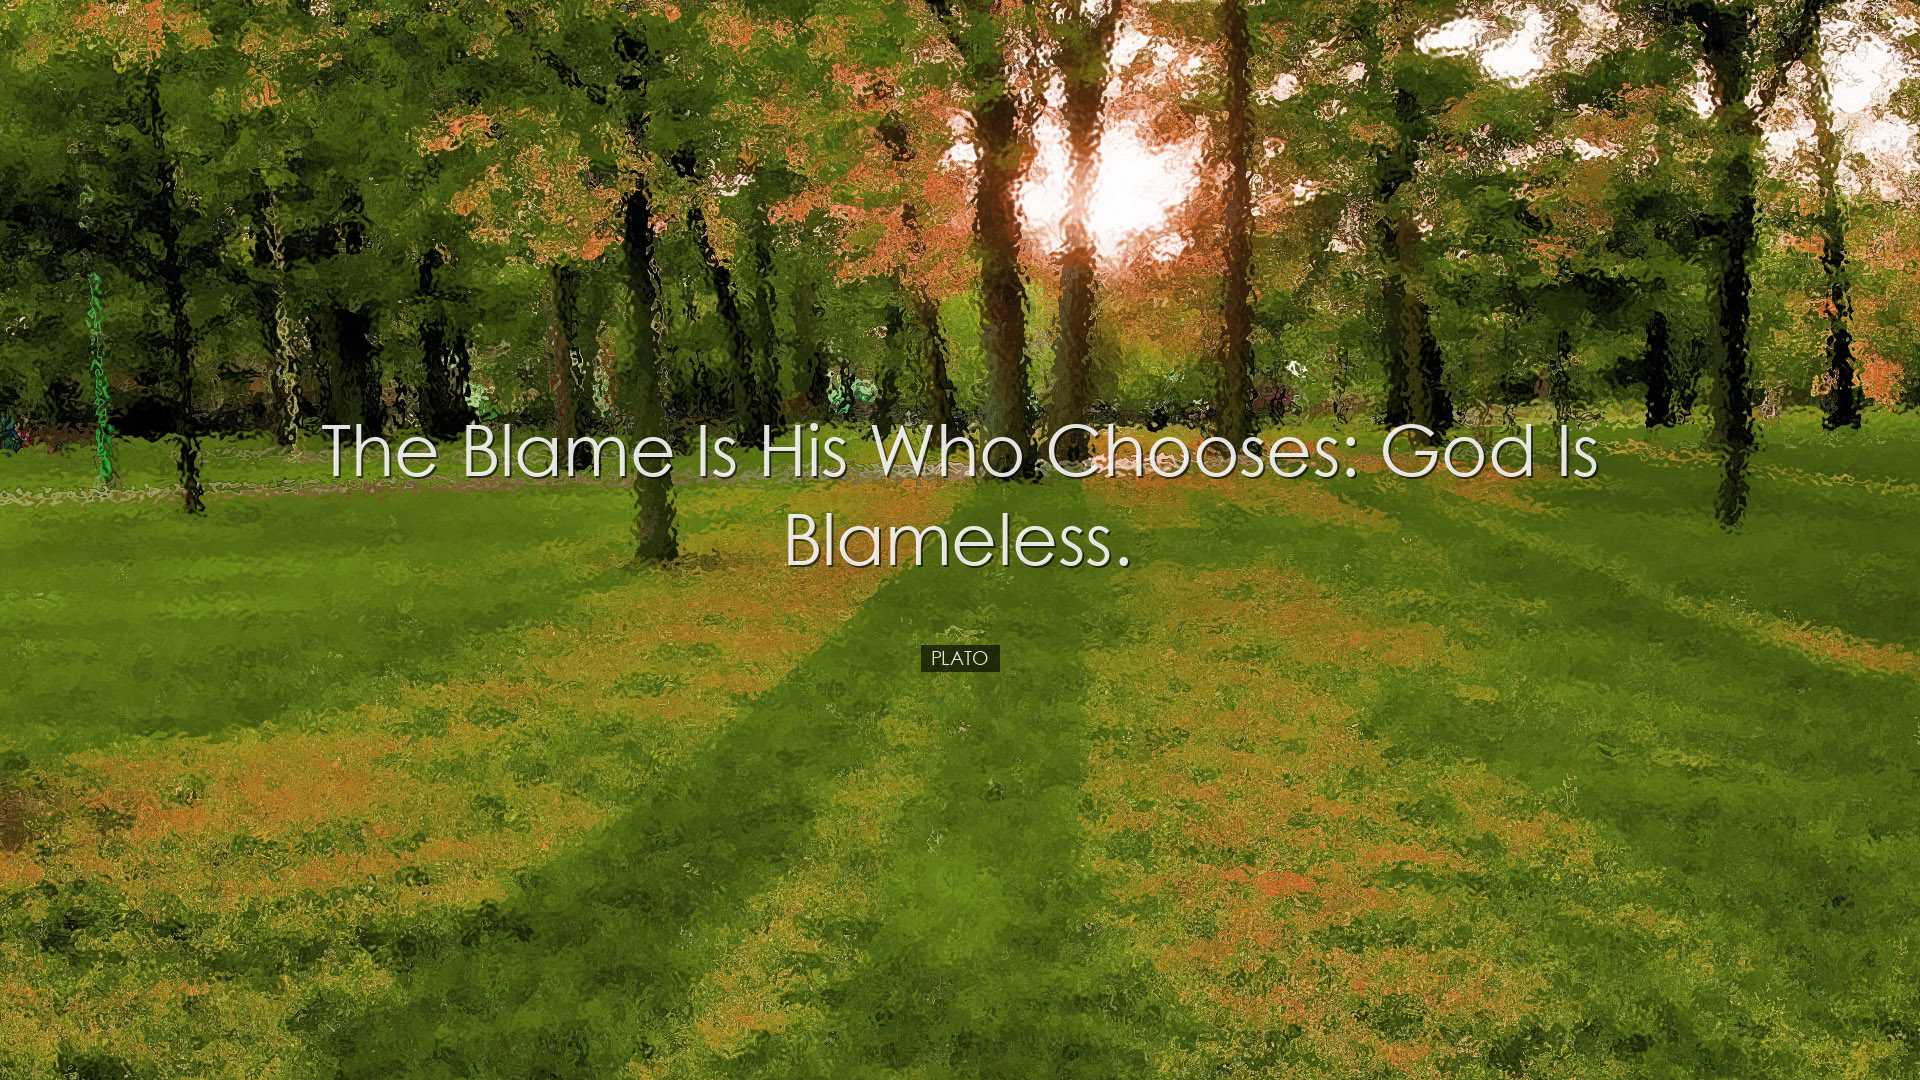 The blame is his who chooses: God is blameless. - Plato